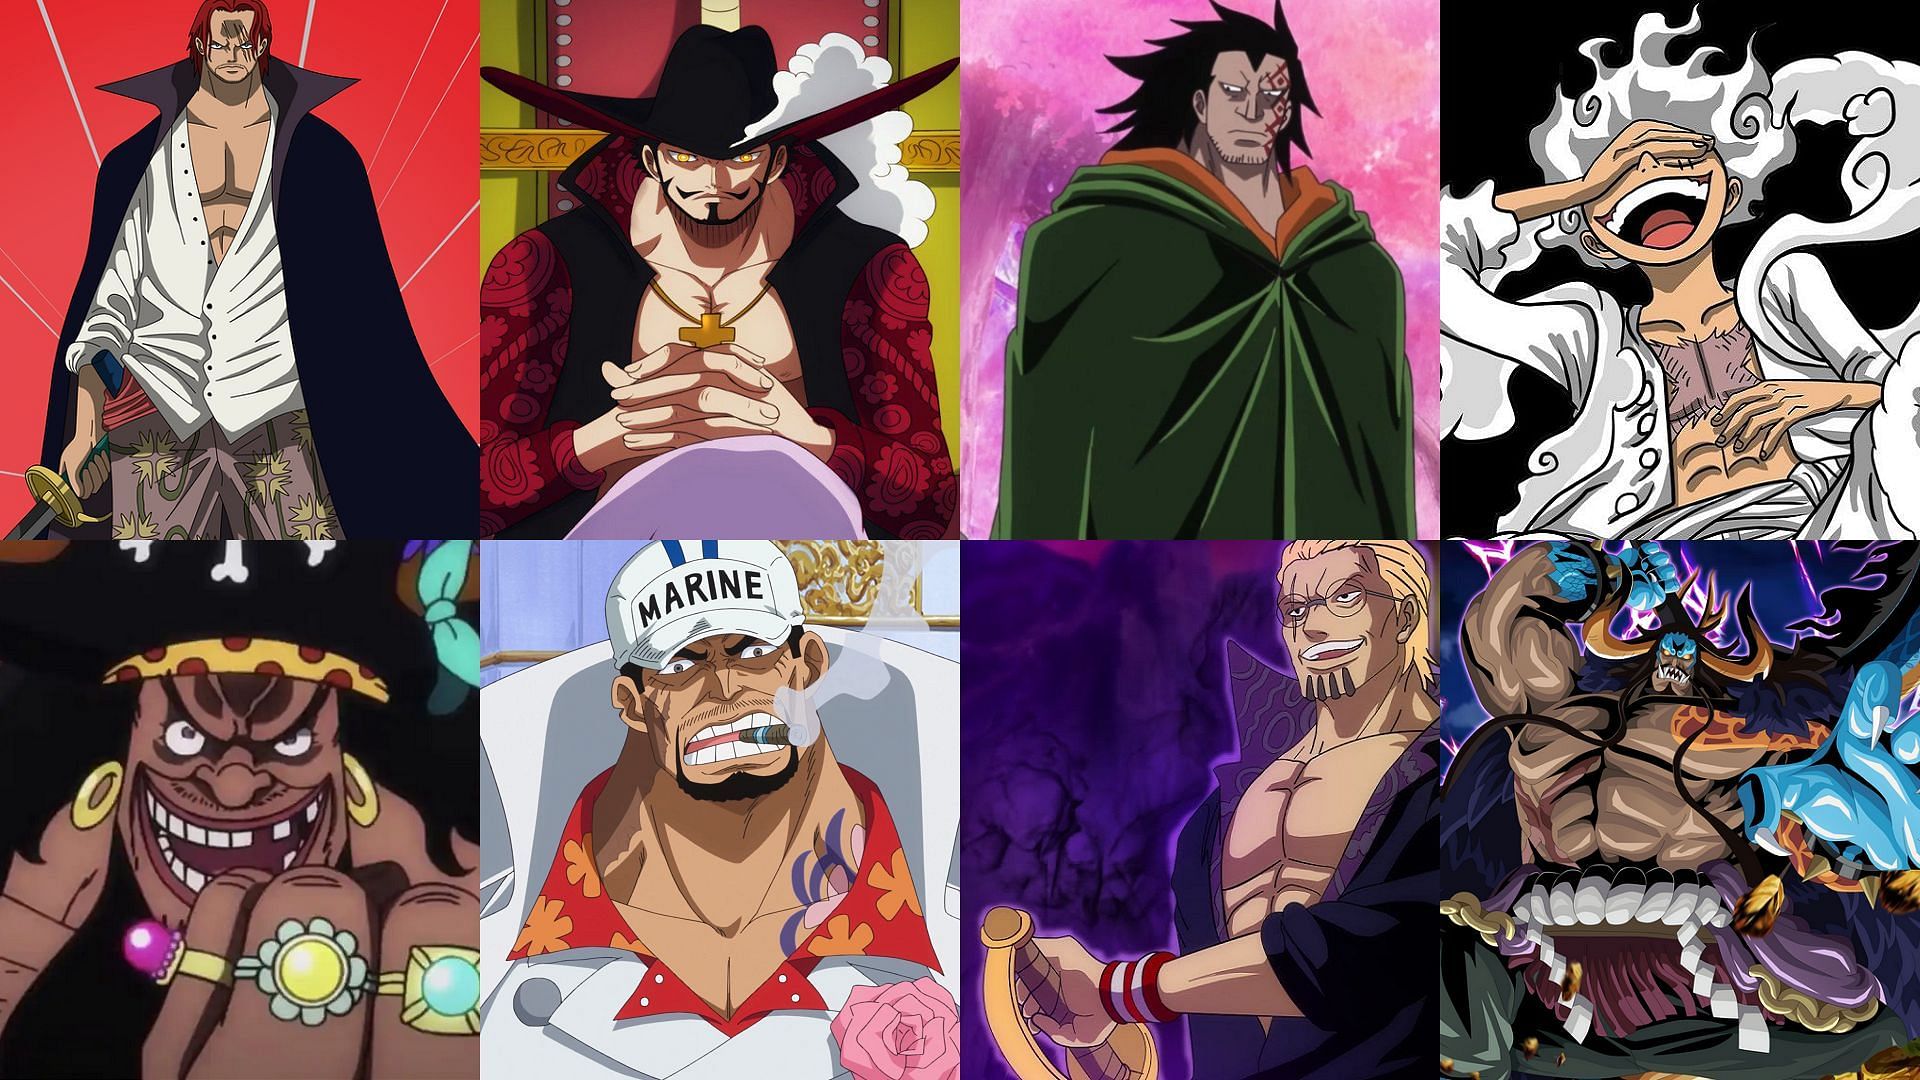 Top 19 Strongest One Piece Characters of All Time, Ranked